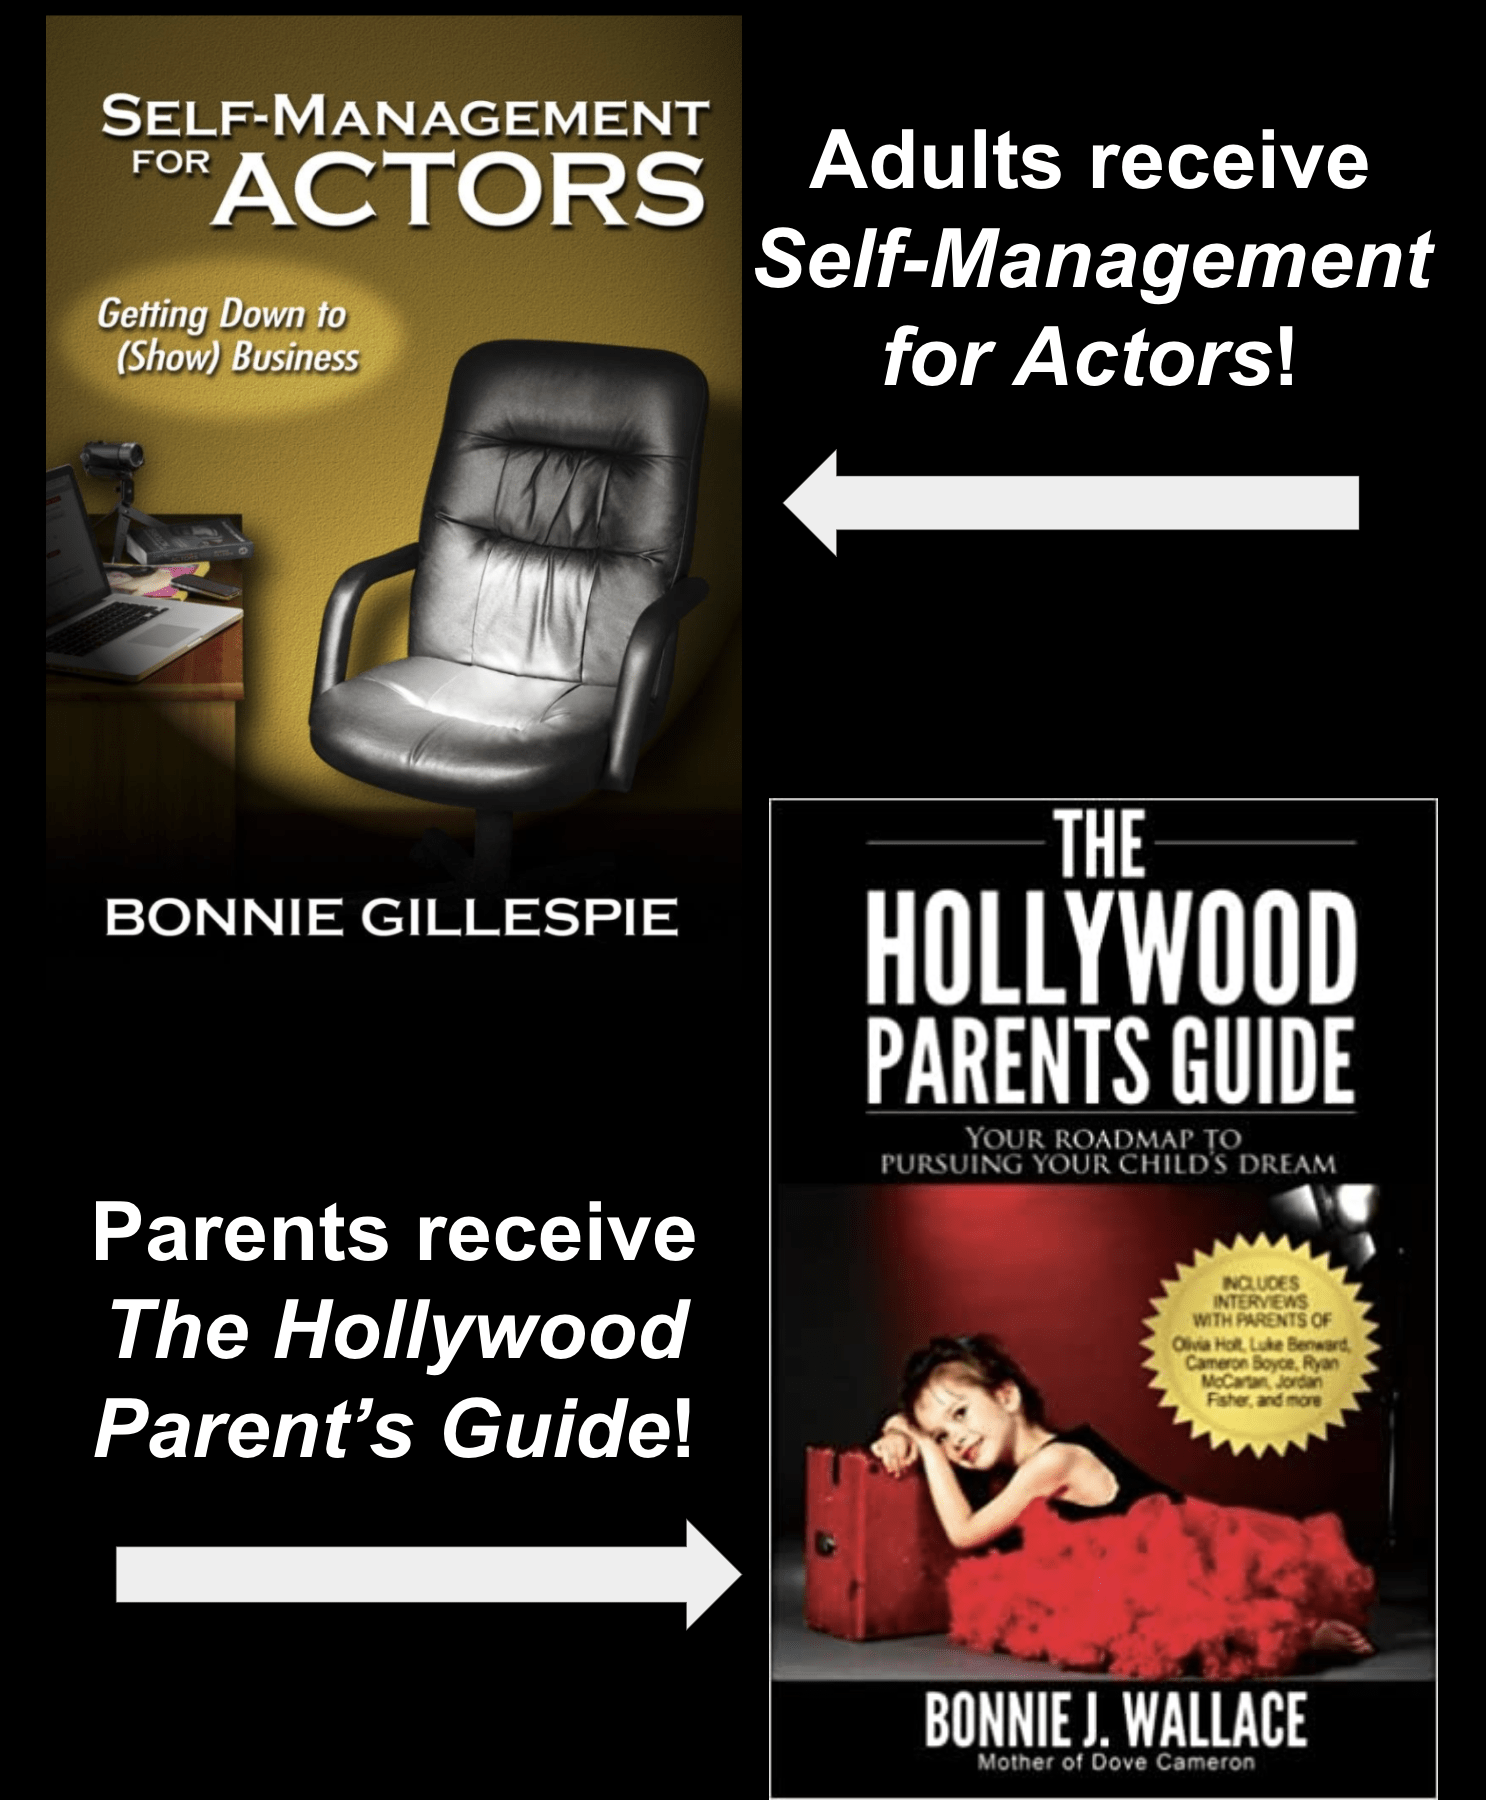 Adults receive Self-Management for Actors! Parents receive The Hollywood Parent's Guide!